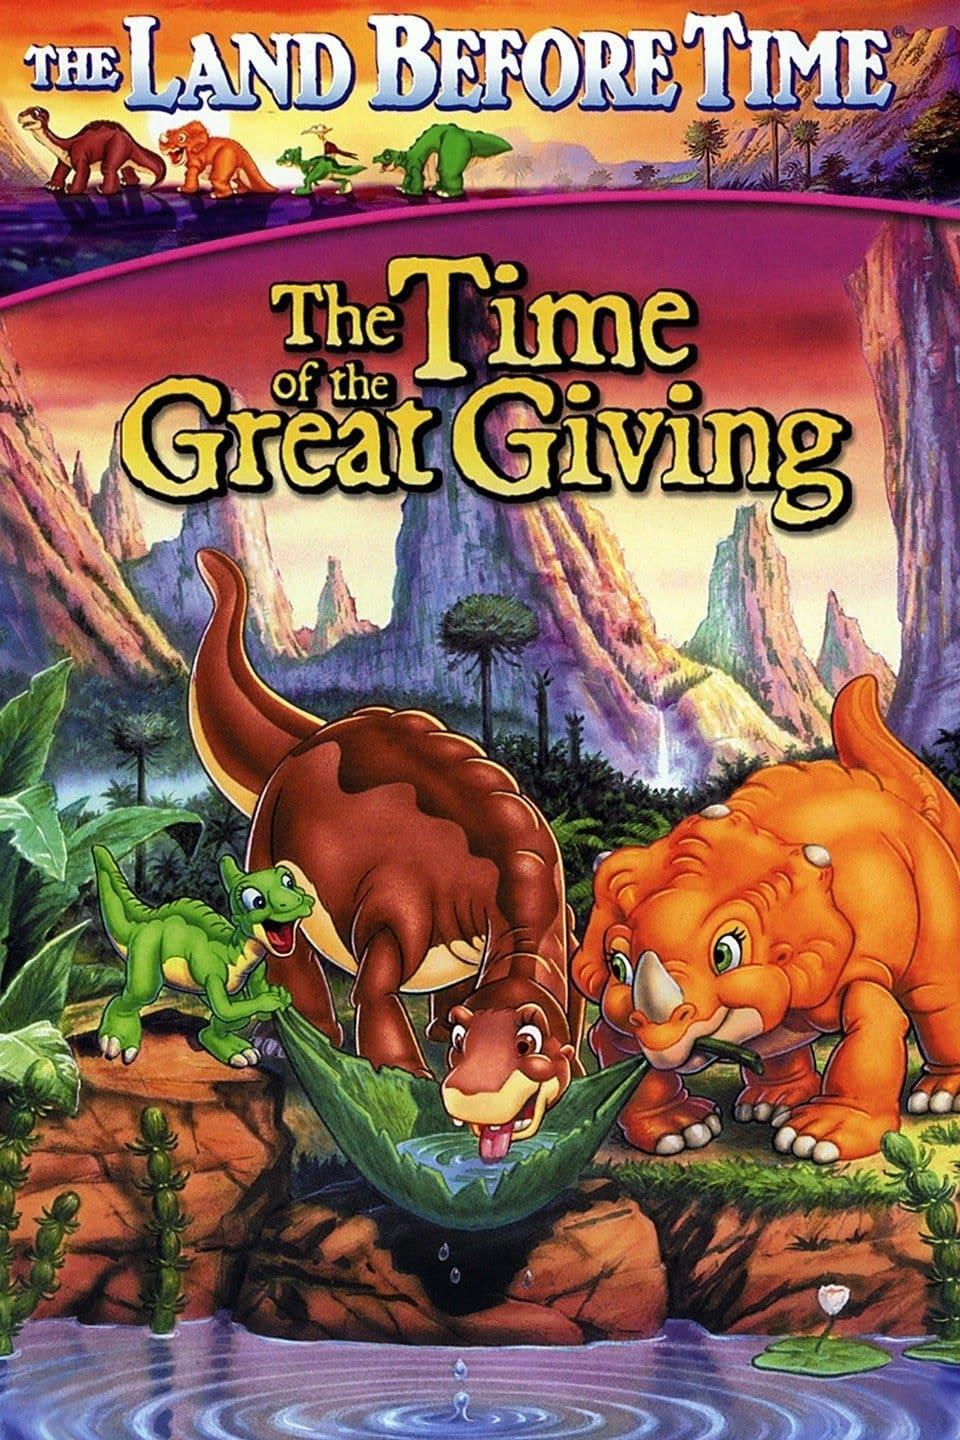 The Land Before Time III: The Time of the Great Giving poster